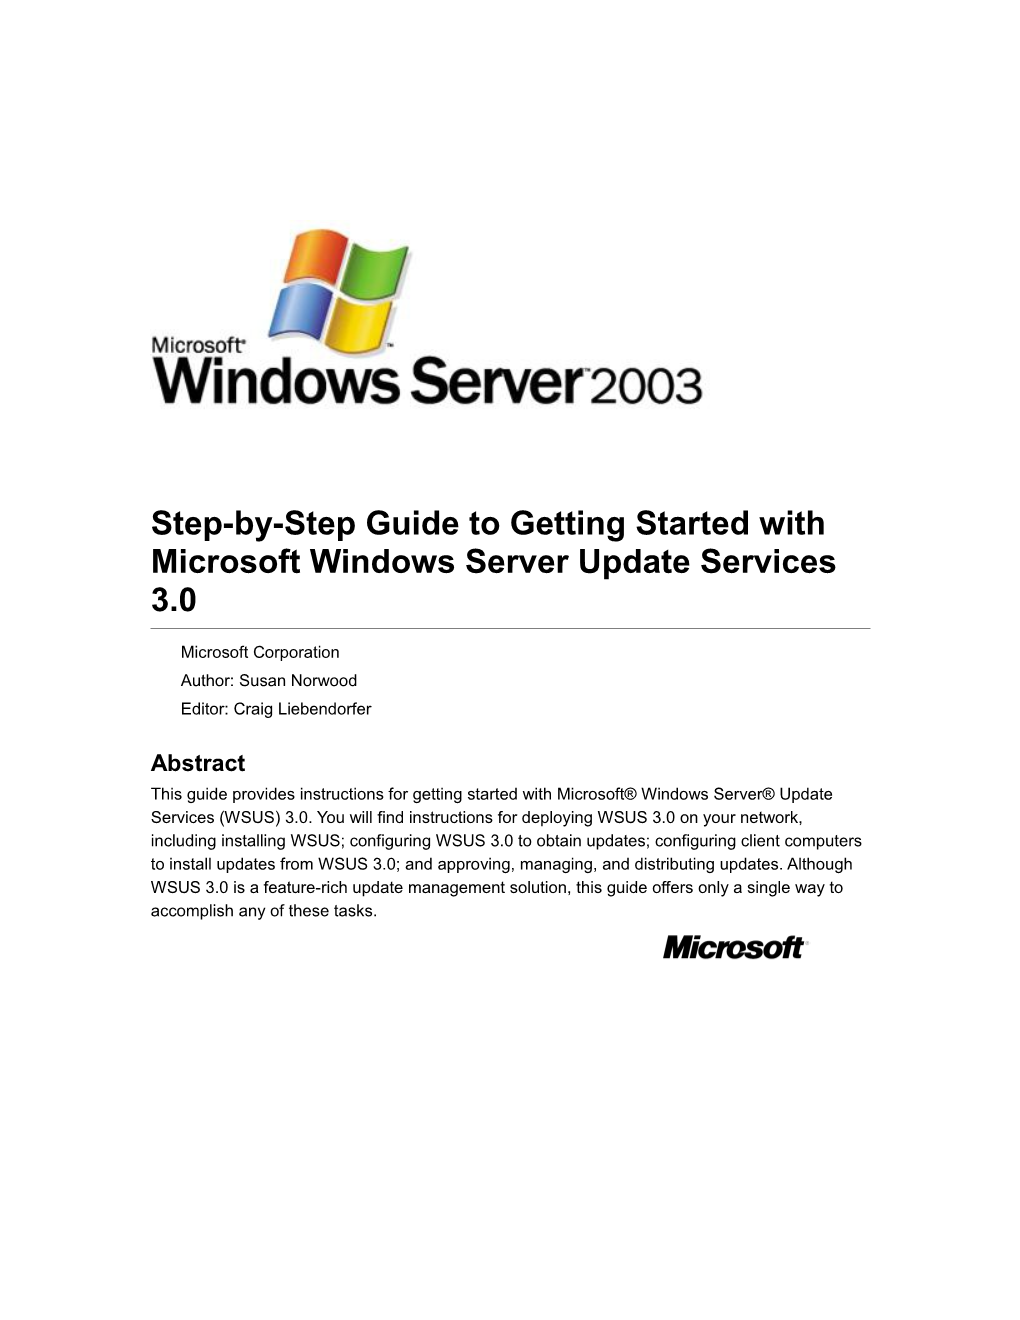 Step-By-Step Guide to Getting Started with Microsoft Windows Server Update Services 3.0